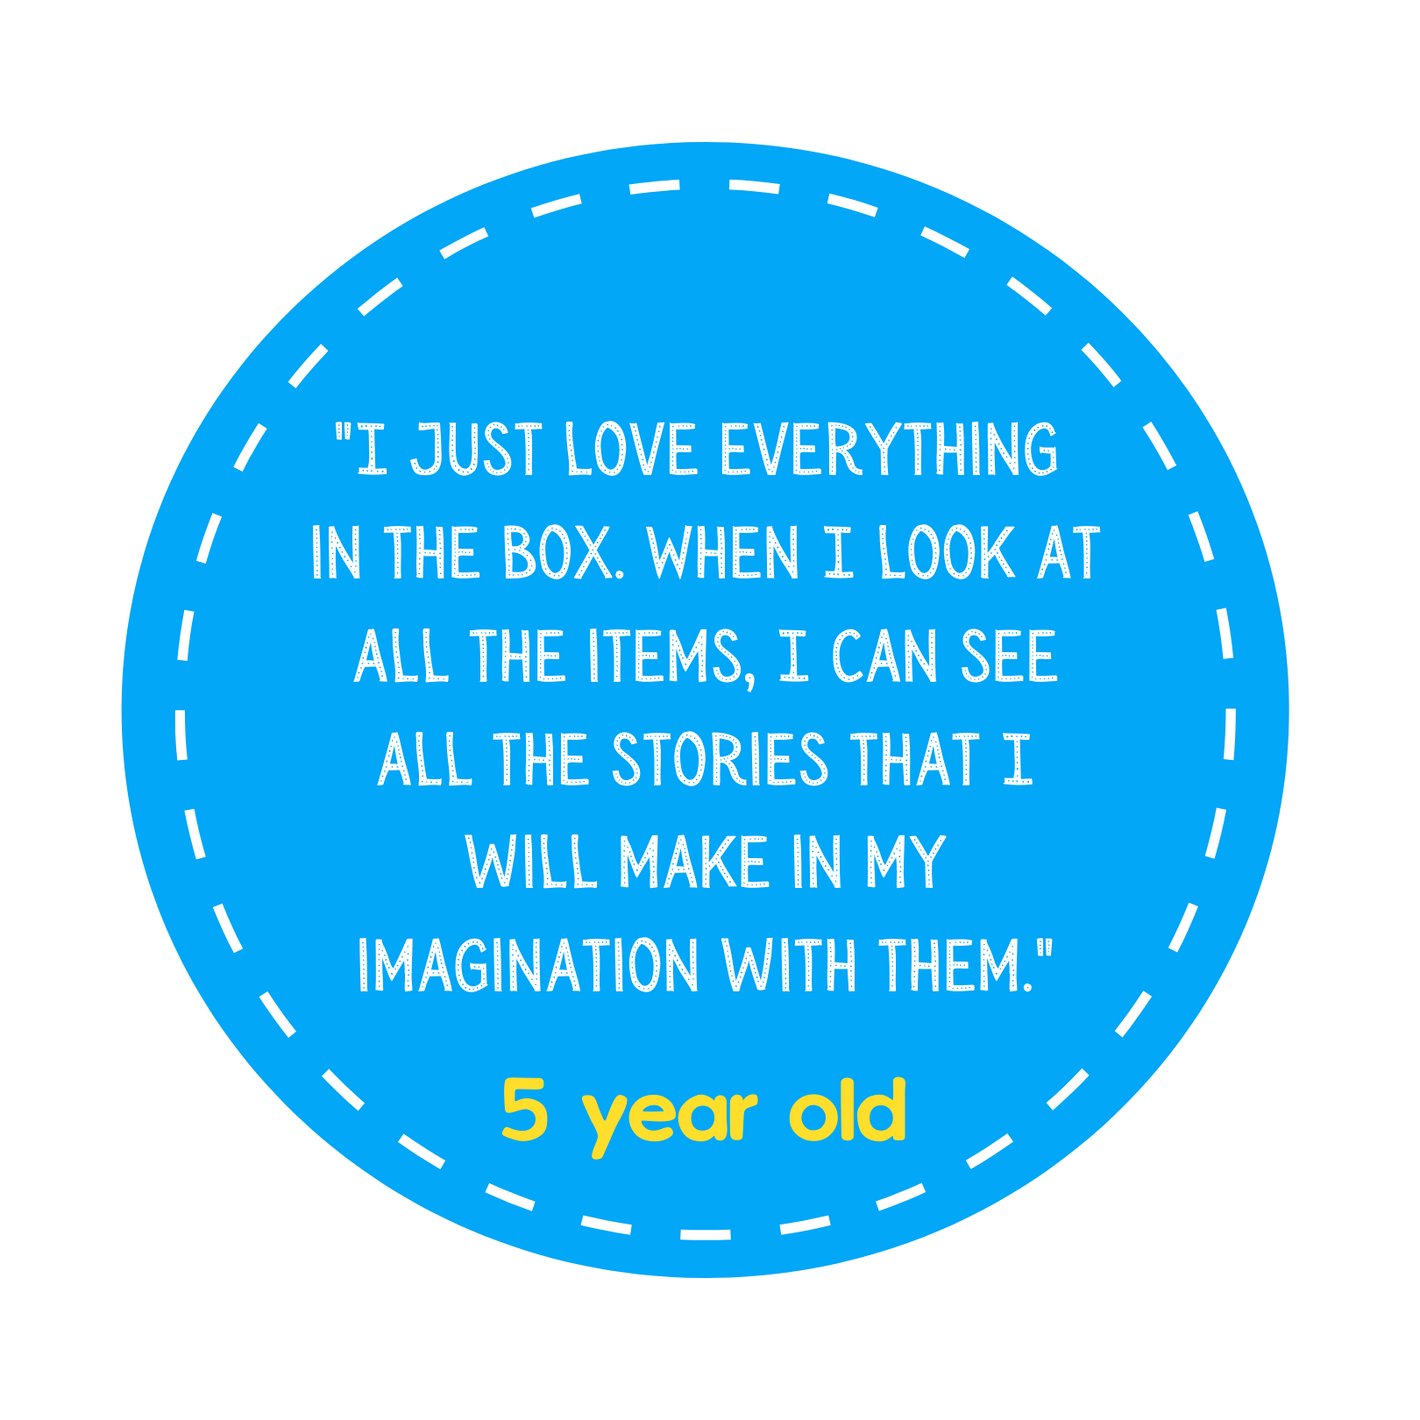 "I just love everything in the box. When I look at all the items, I can see all the stories that I will make in my imagination with them." 5 year old